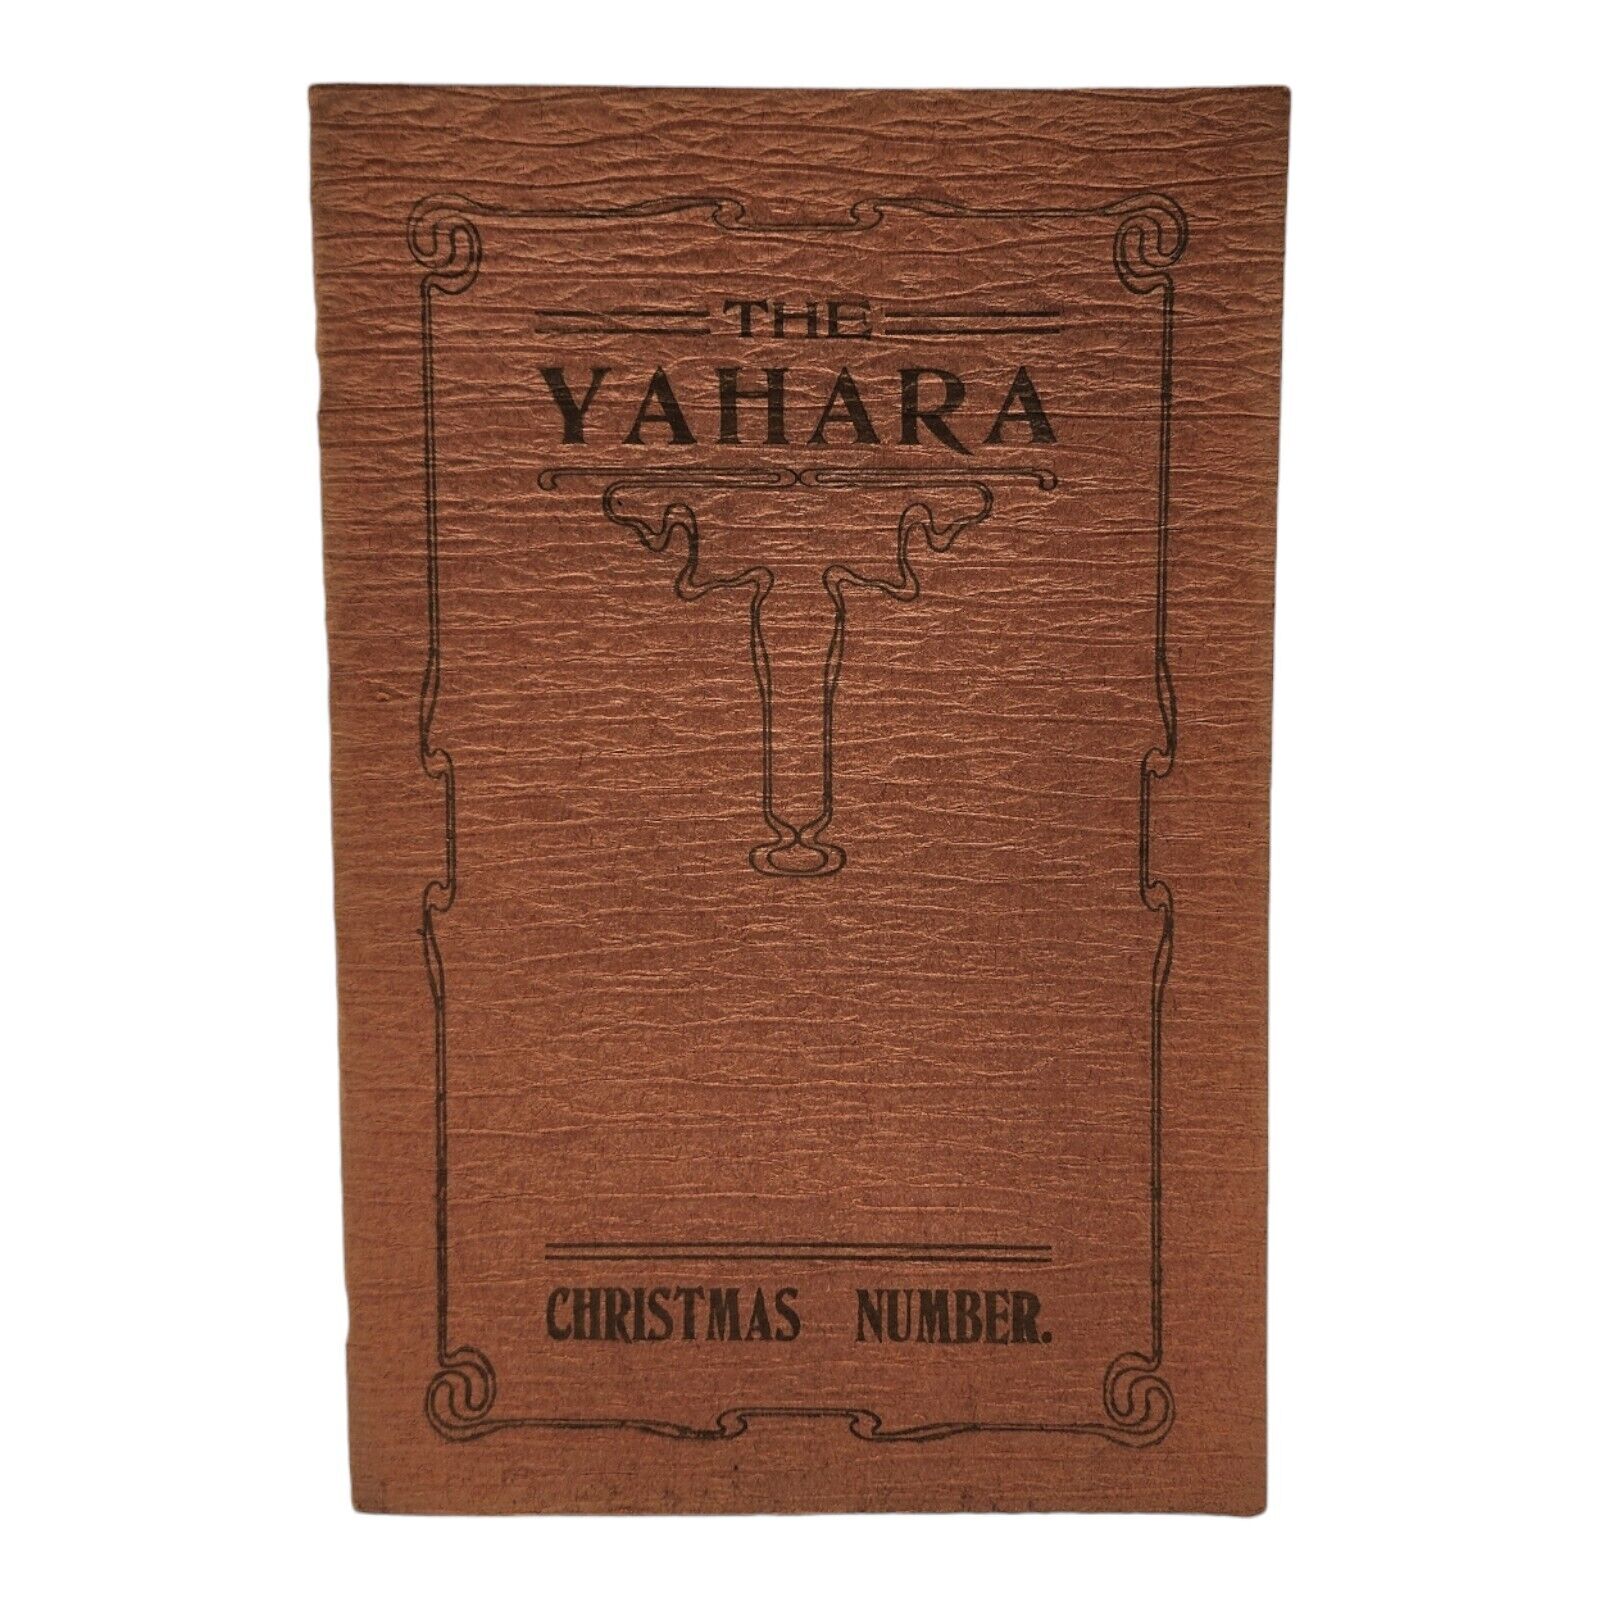 Vintage Antique The Yahara Stoughton WI HIgh School News Book Christmas Number 